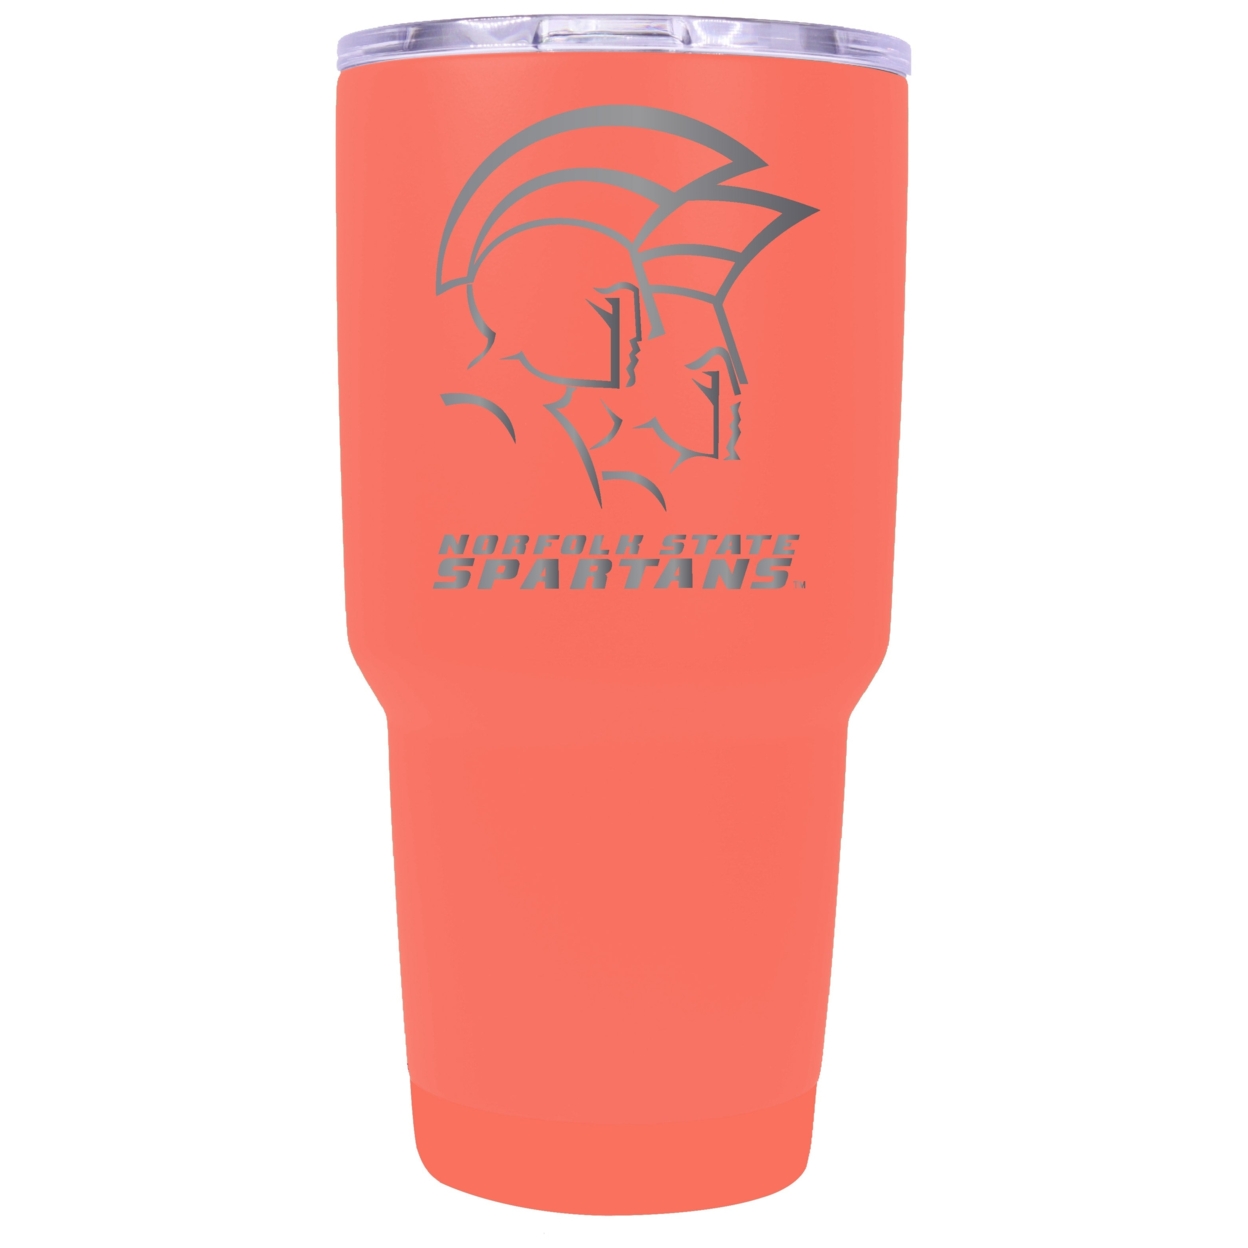 Norfolk State University 24 Oz Laser Engraved Stainless Steel Insulated Tumbler - Choose Your Color. - Coral